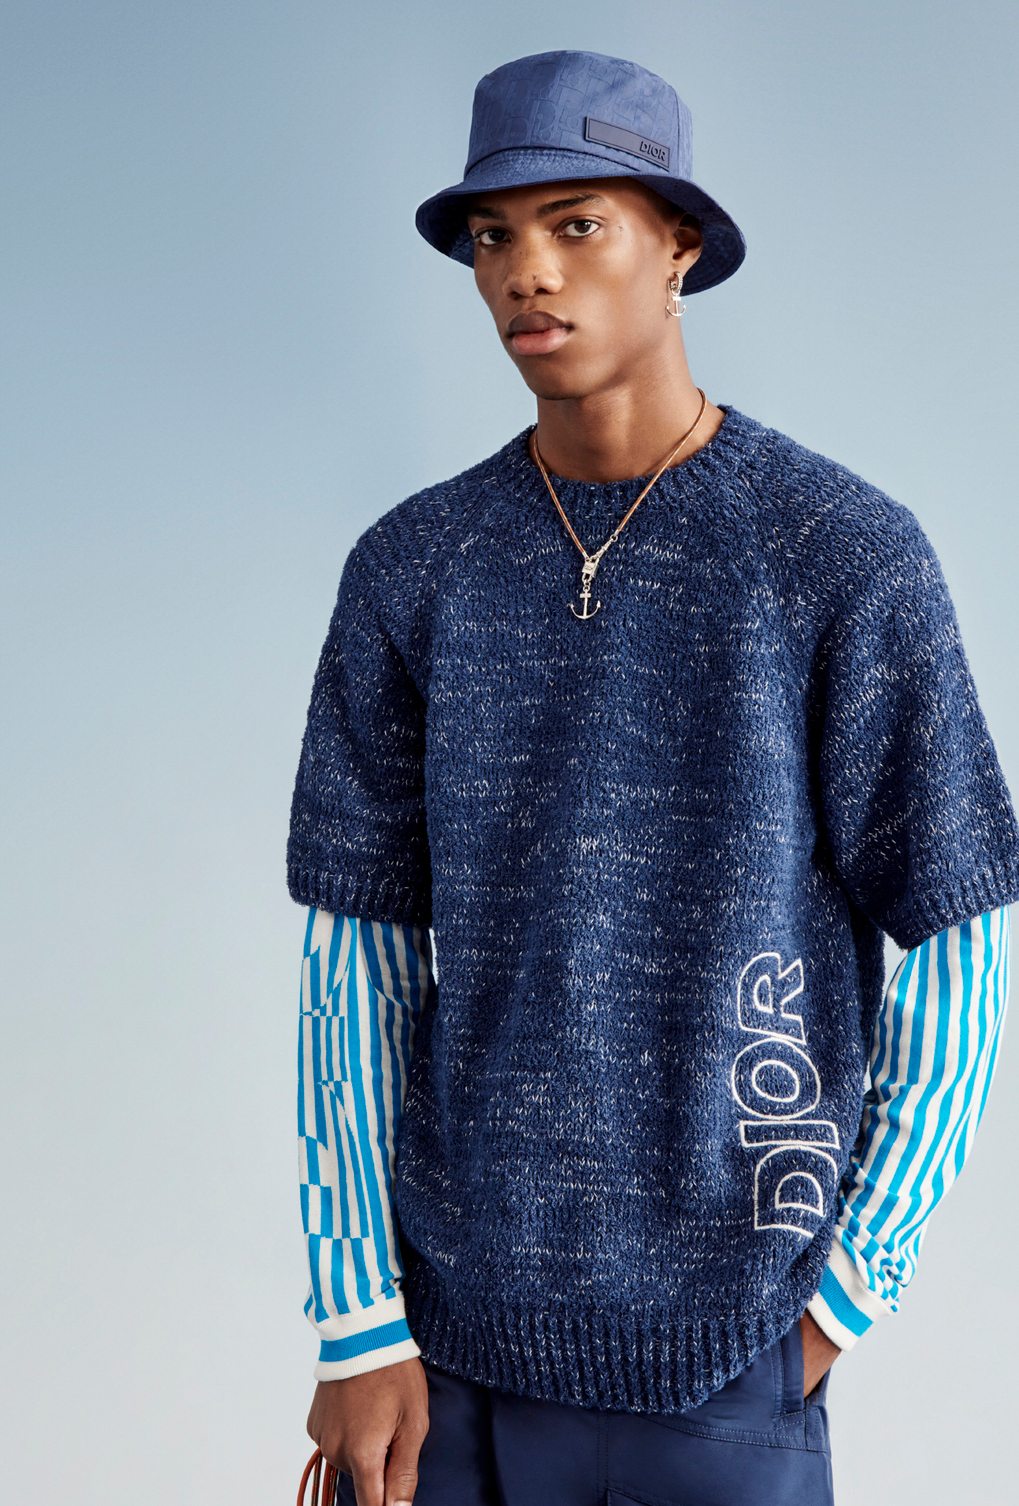 Dior collabore avec l'ONG Parley for the Oceans pour sa collection capsule homme beachwear 